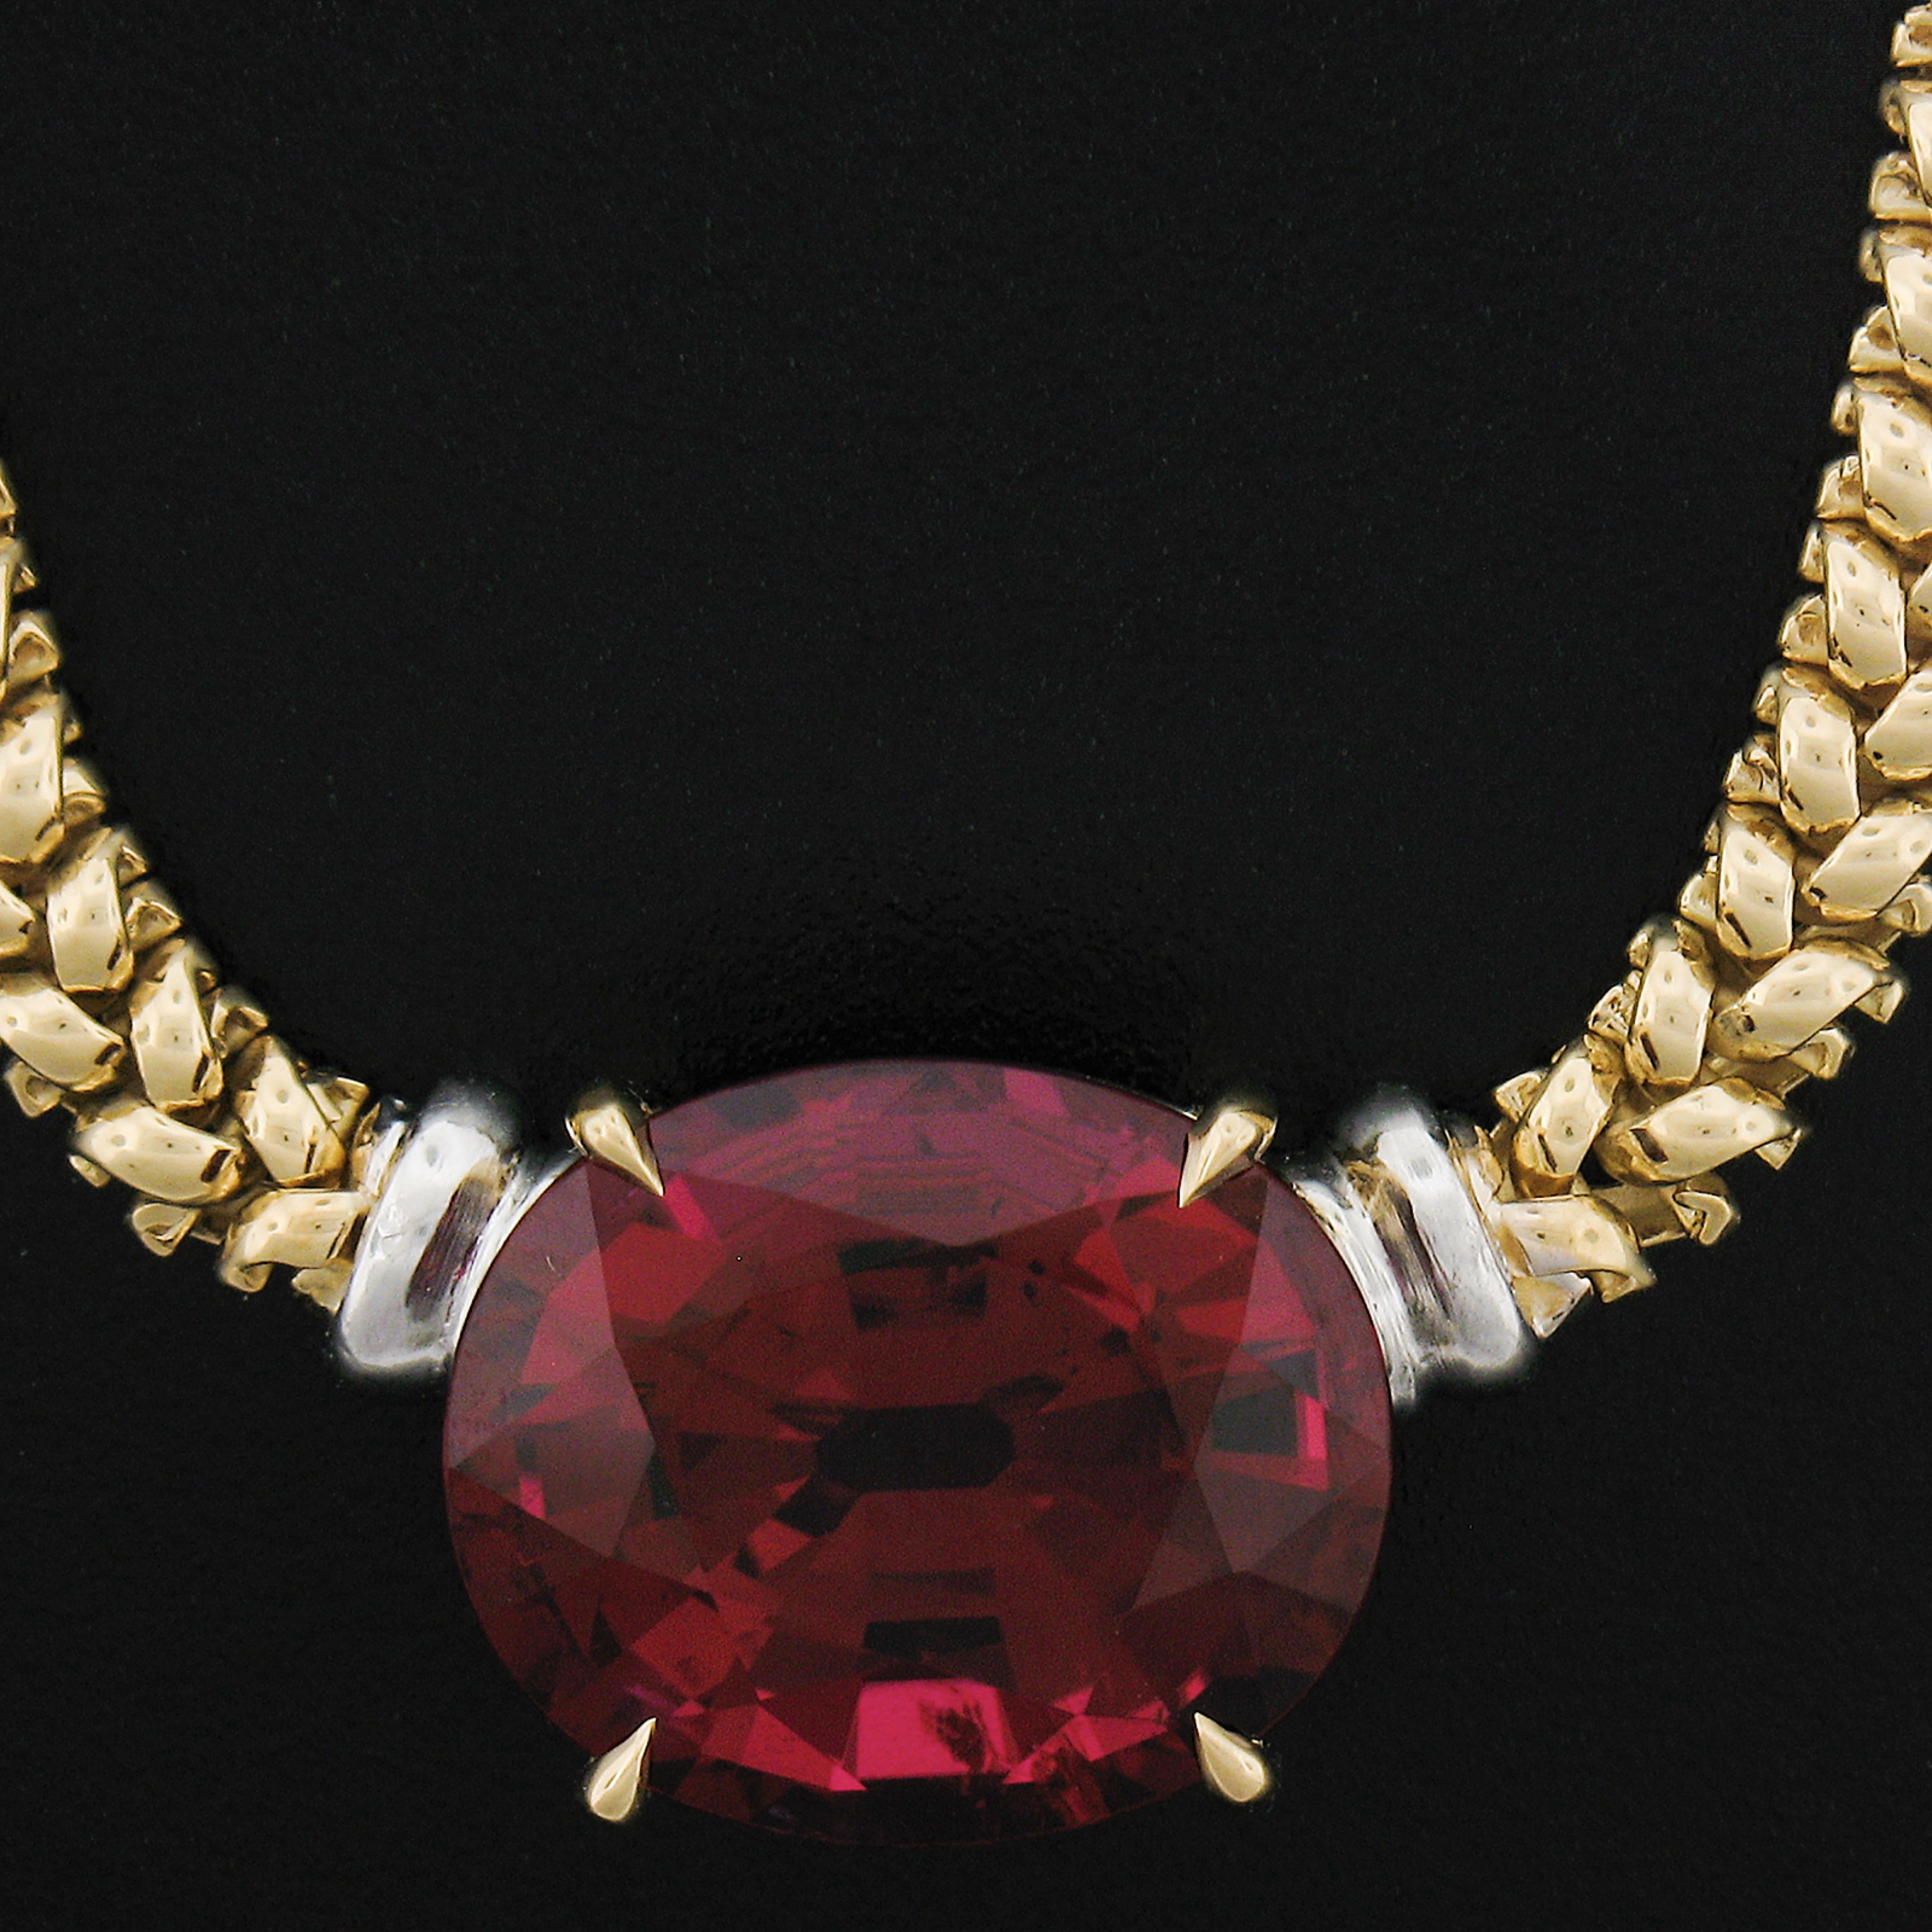 18k Two Tone Gold 12.82 Carat GIA Large Oval Red Rubellite Tourmaline Necklace For Sale 1